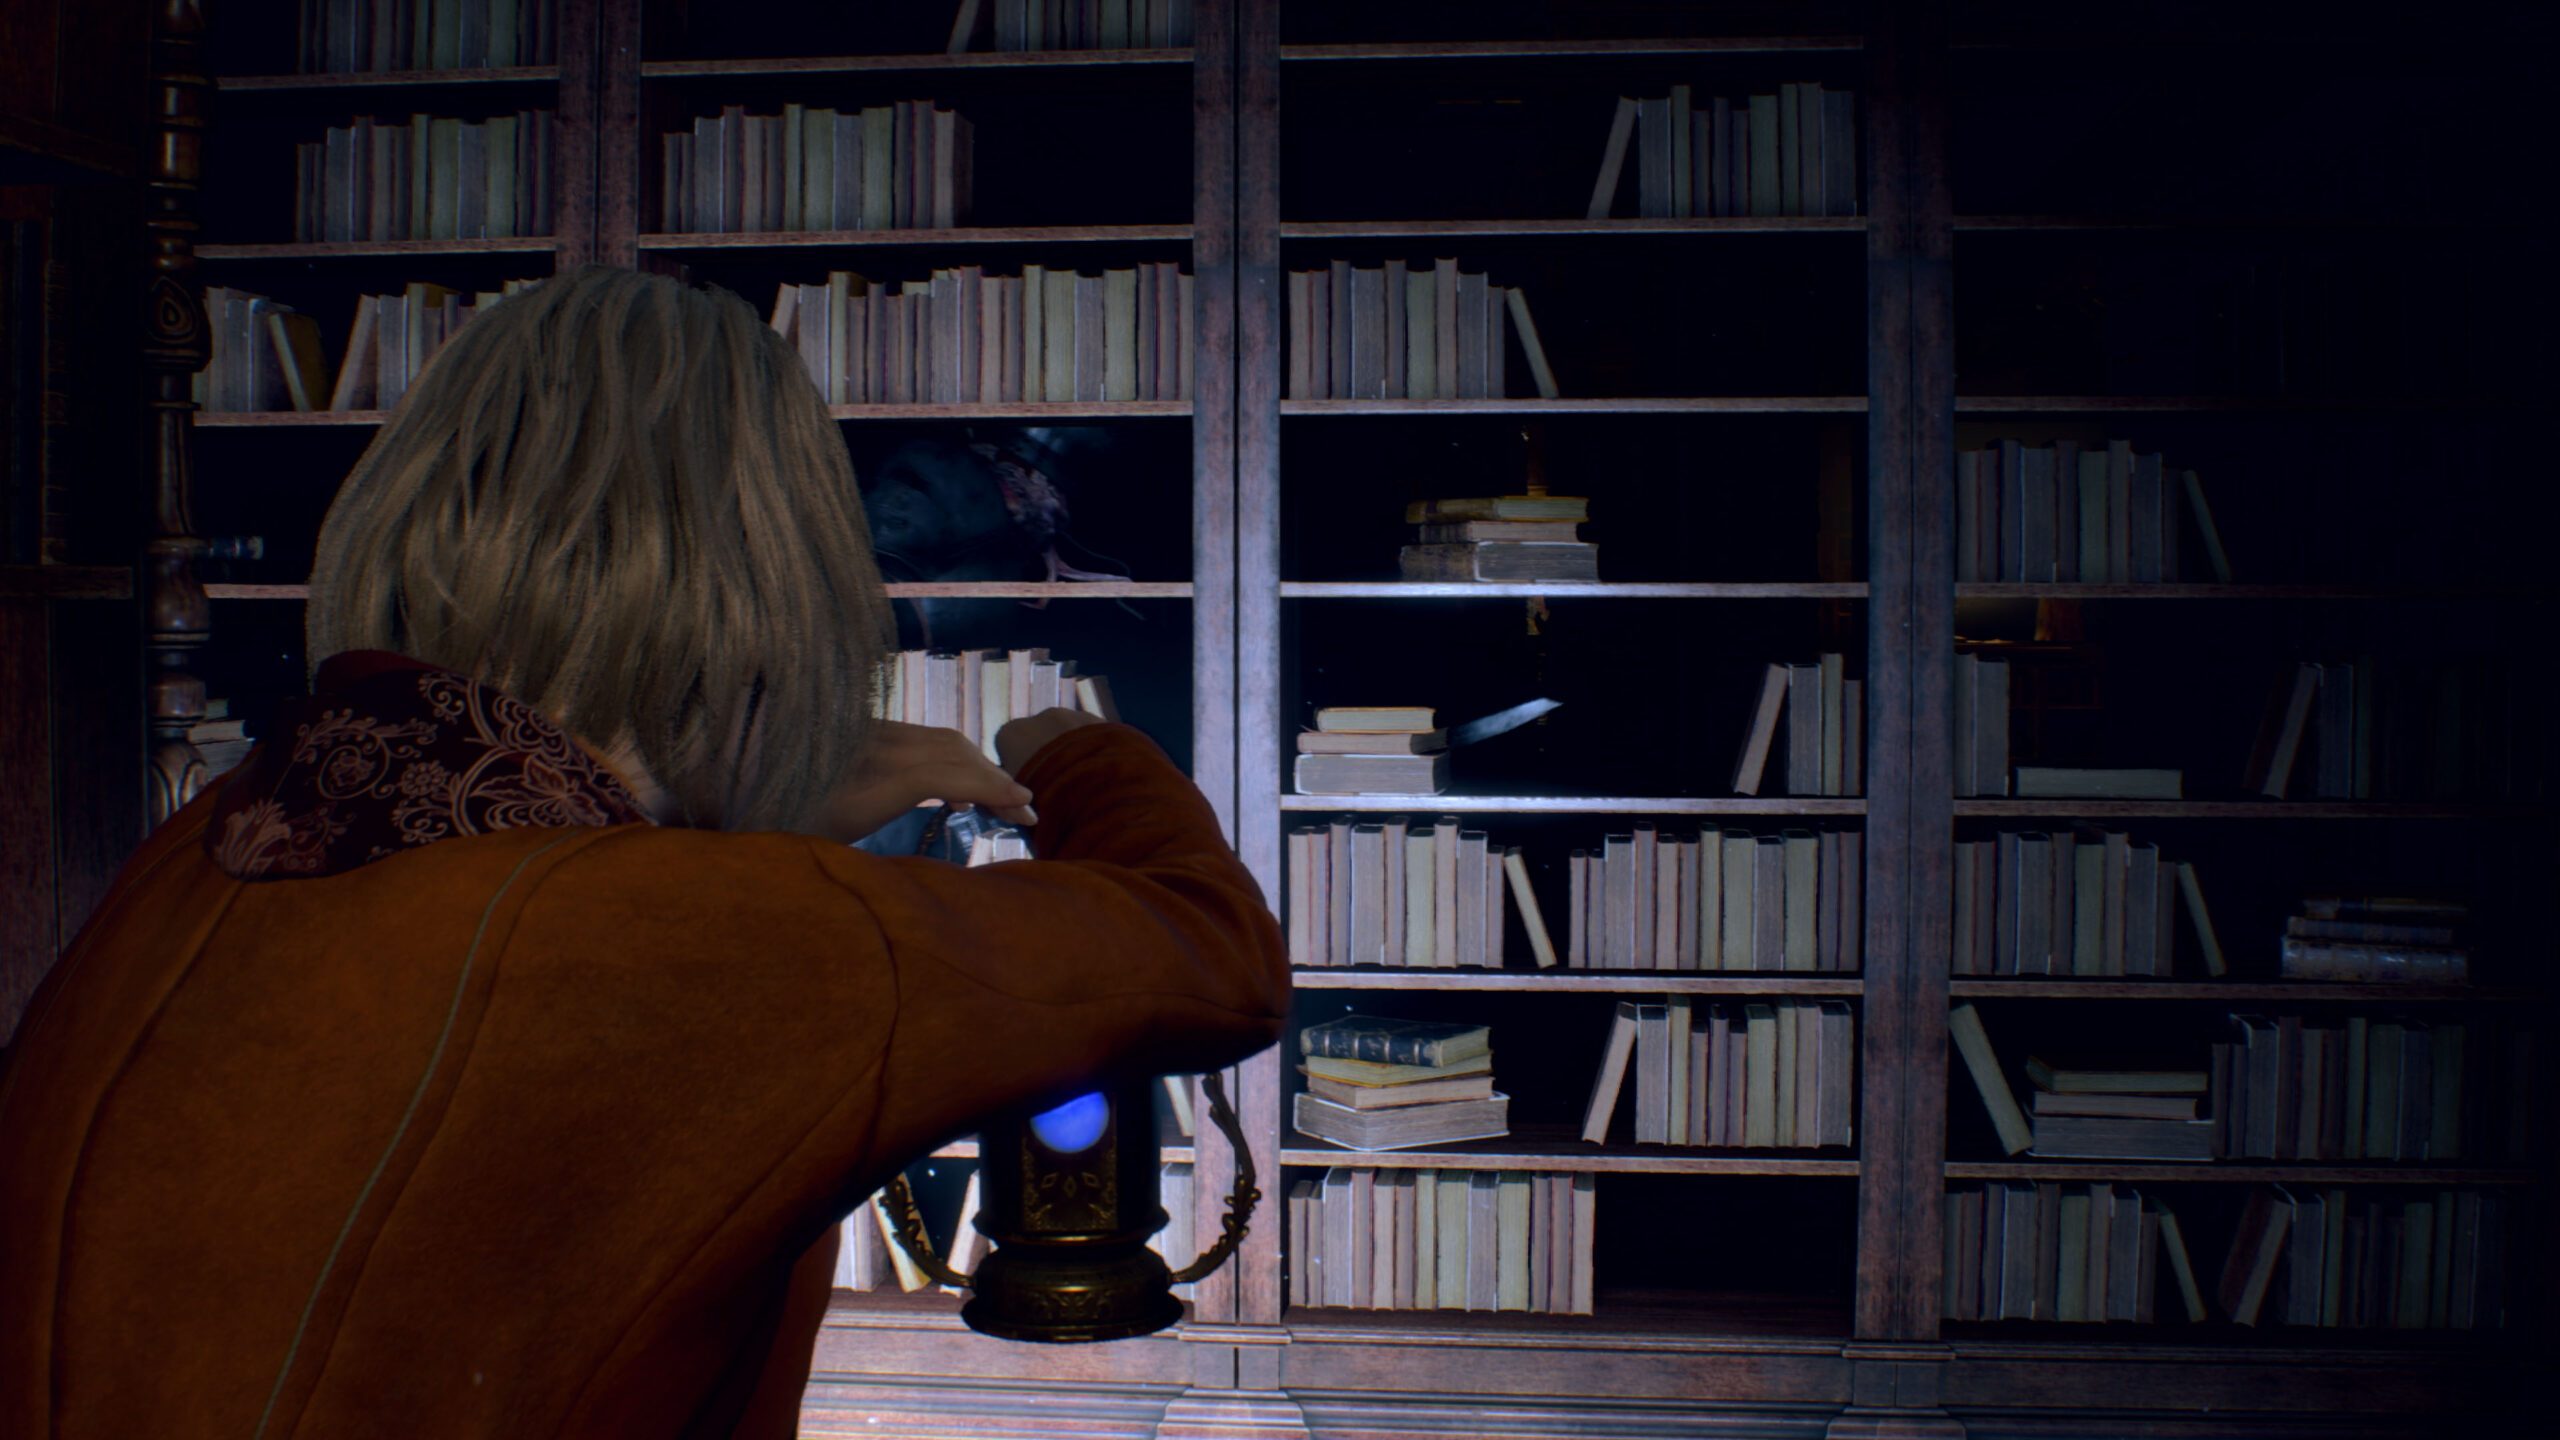 Ashley hides behind a bookcase as an ominous figure walks past on its other side.